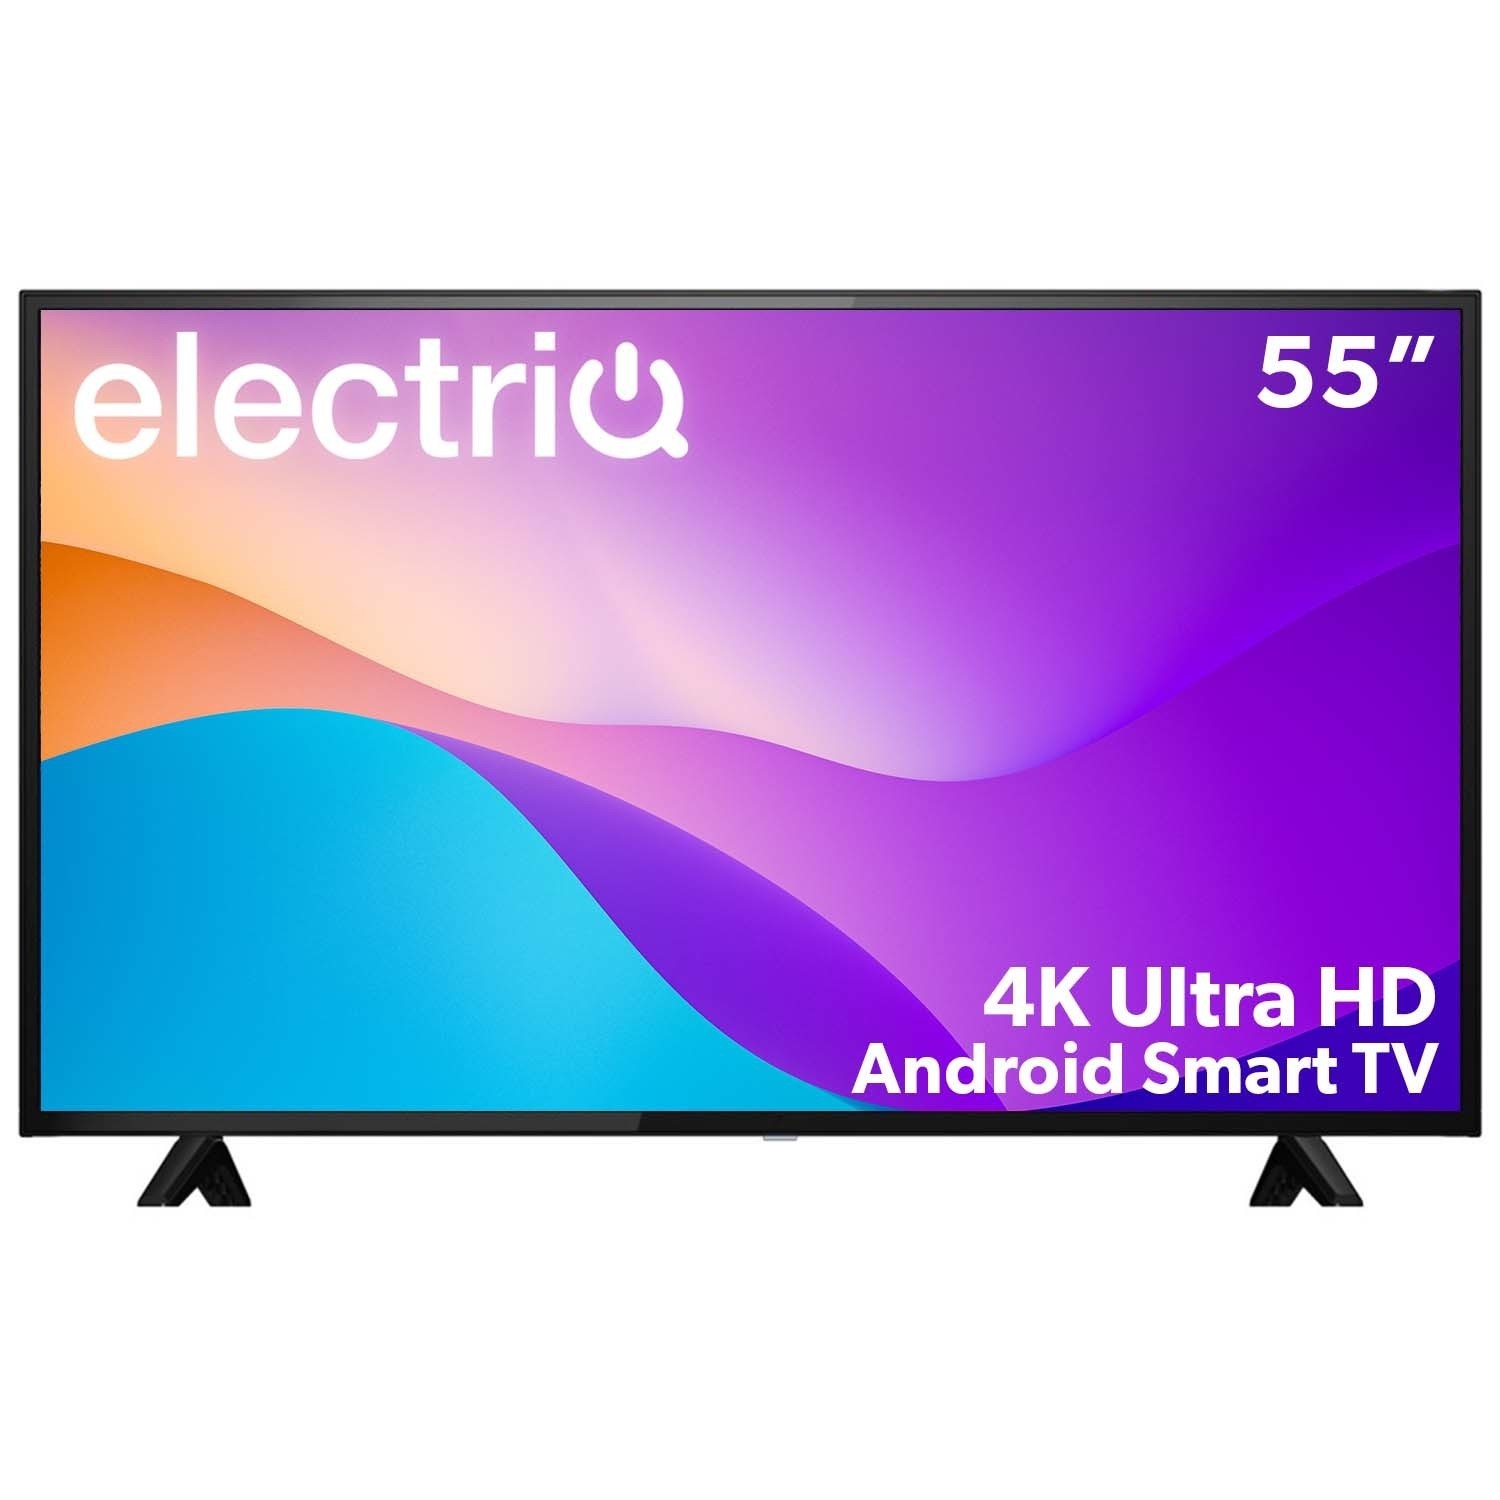 55 Android Smart 4K Ultra HD HDR LED TV with Freeview HD